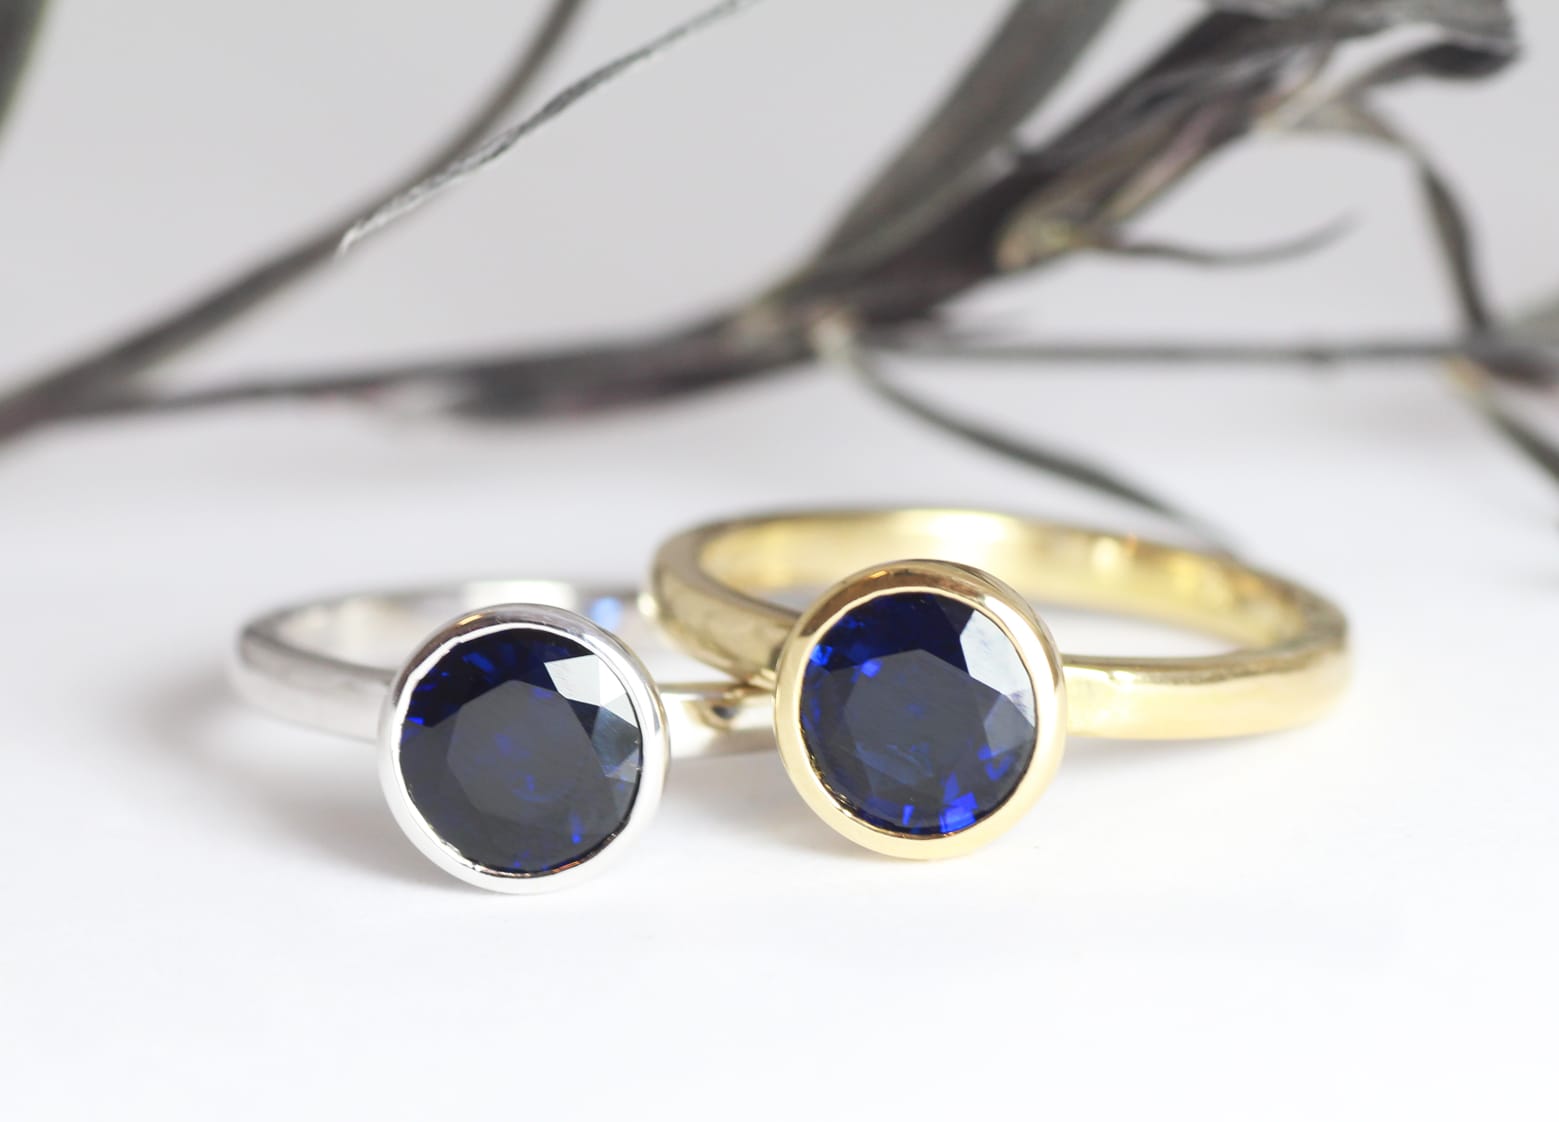 Recycled gold with vintage sapphires by Zoe Pook Jewellery